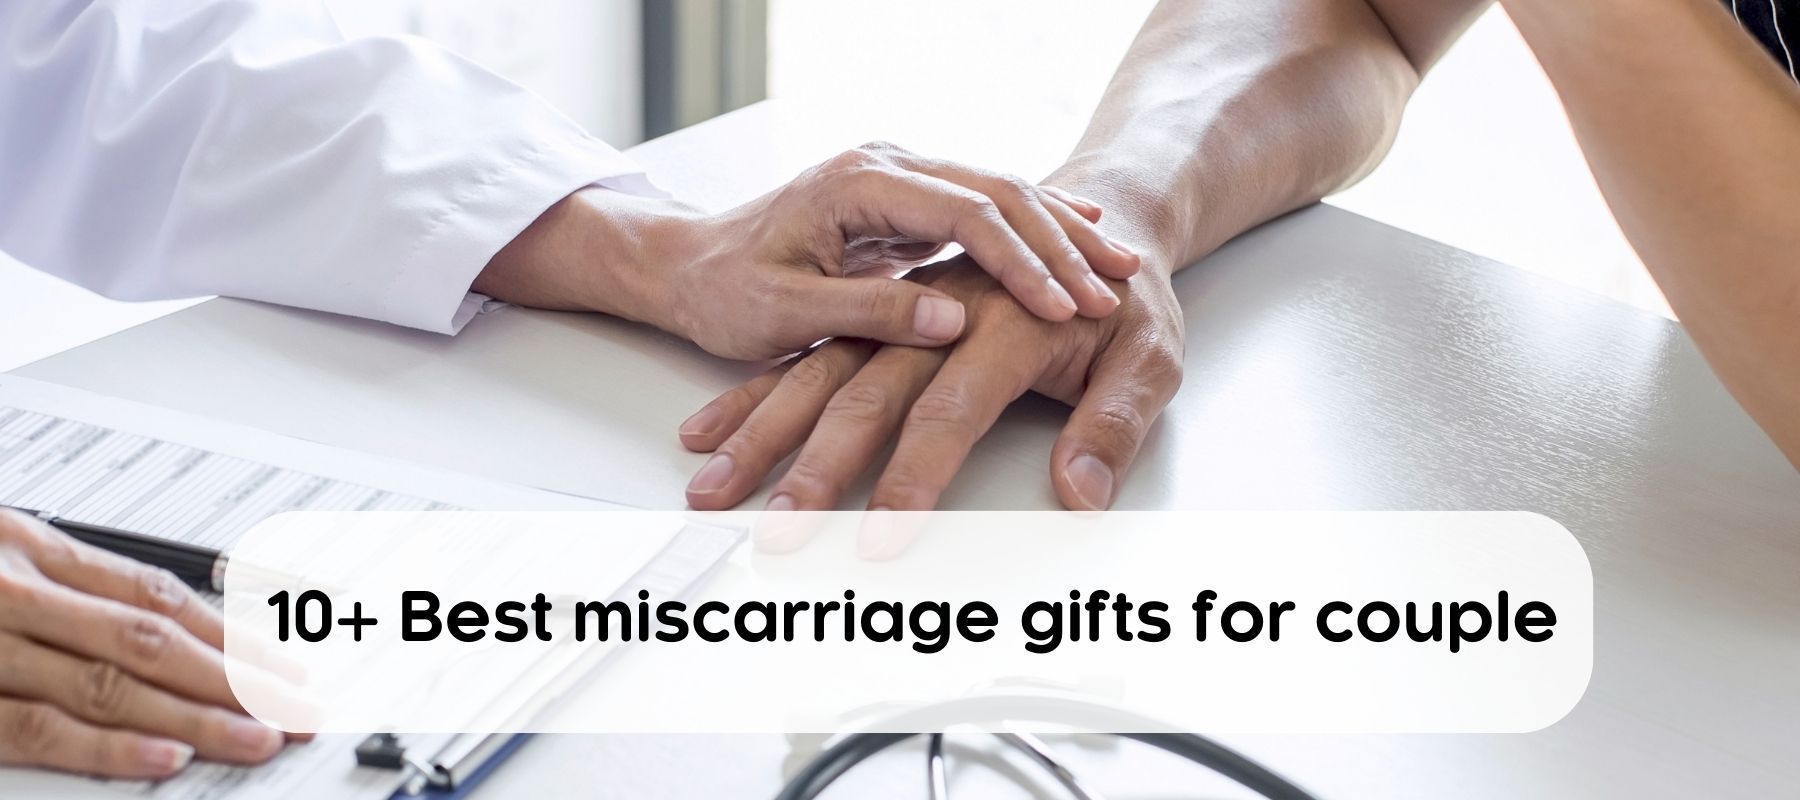 Miscarriage-gifts-for-couple